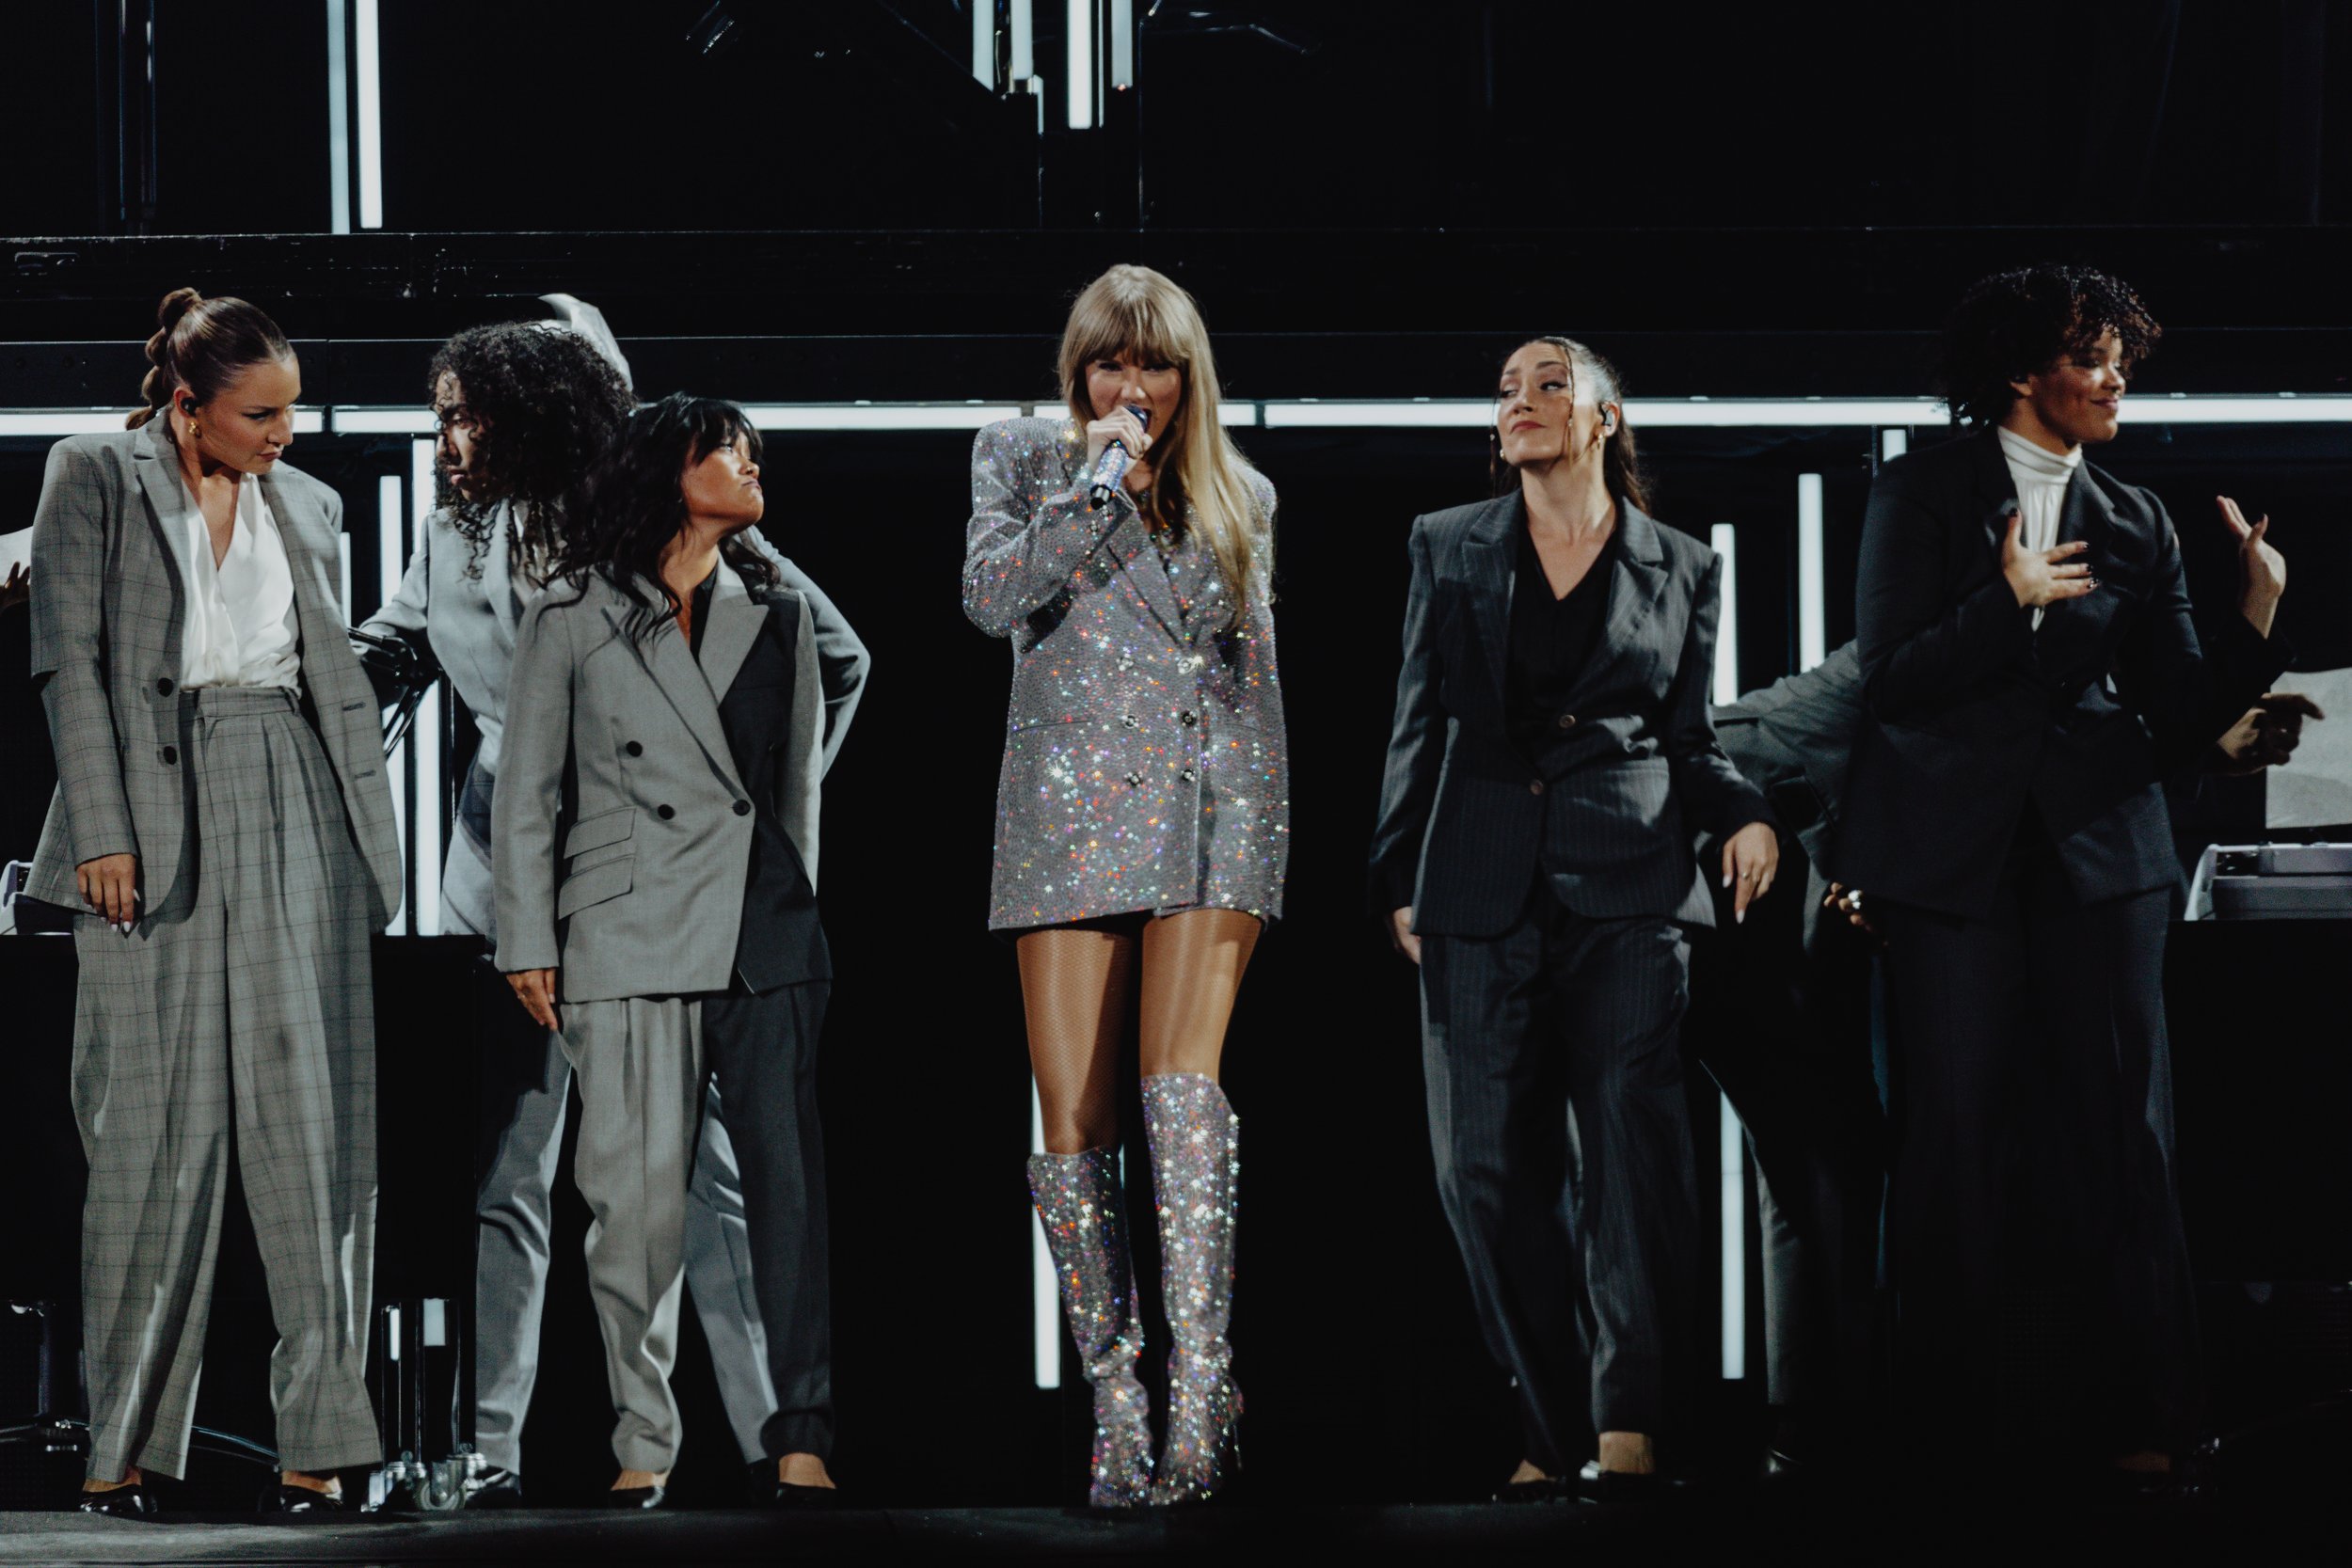  Swift makes a powerful statement performing “The Man” with her expressive dancers. 